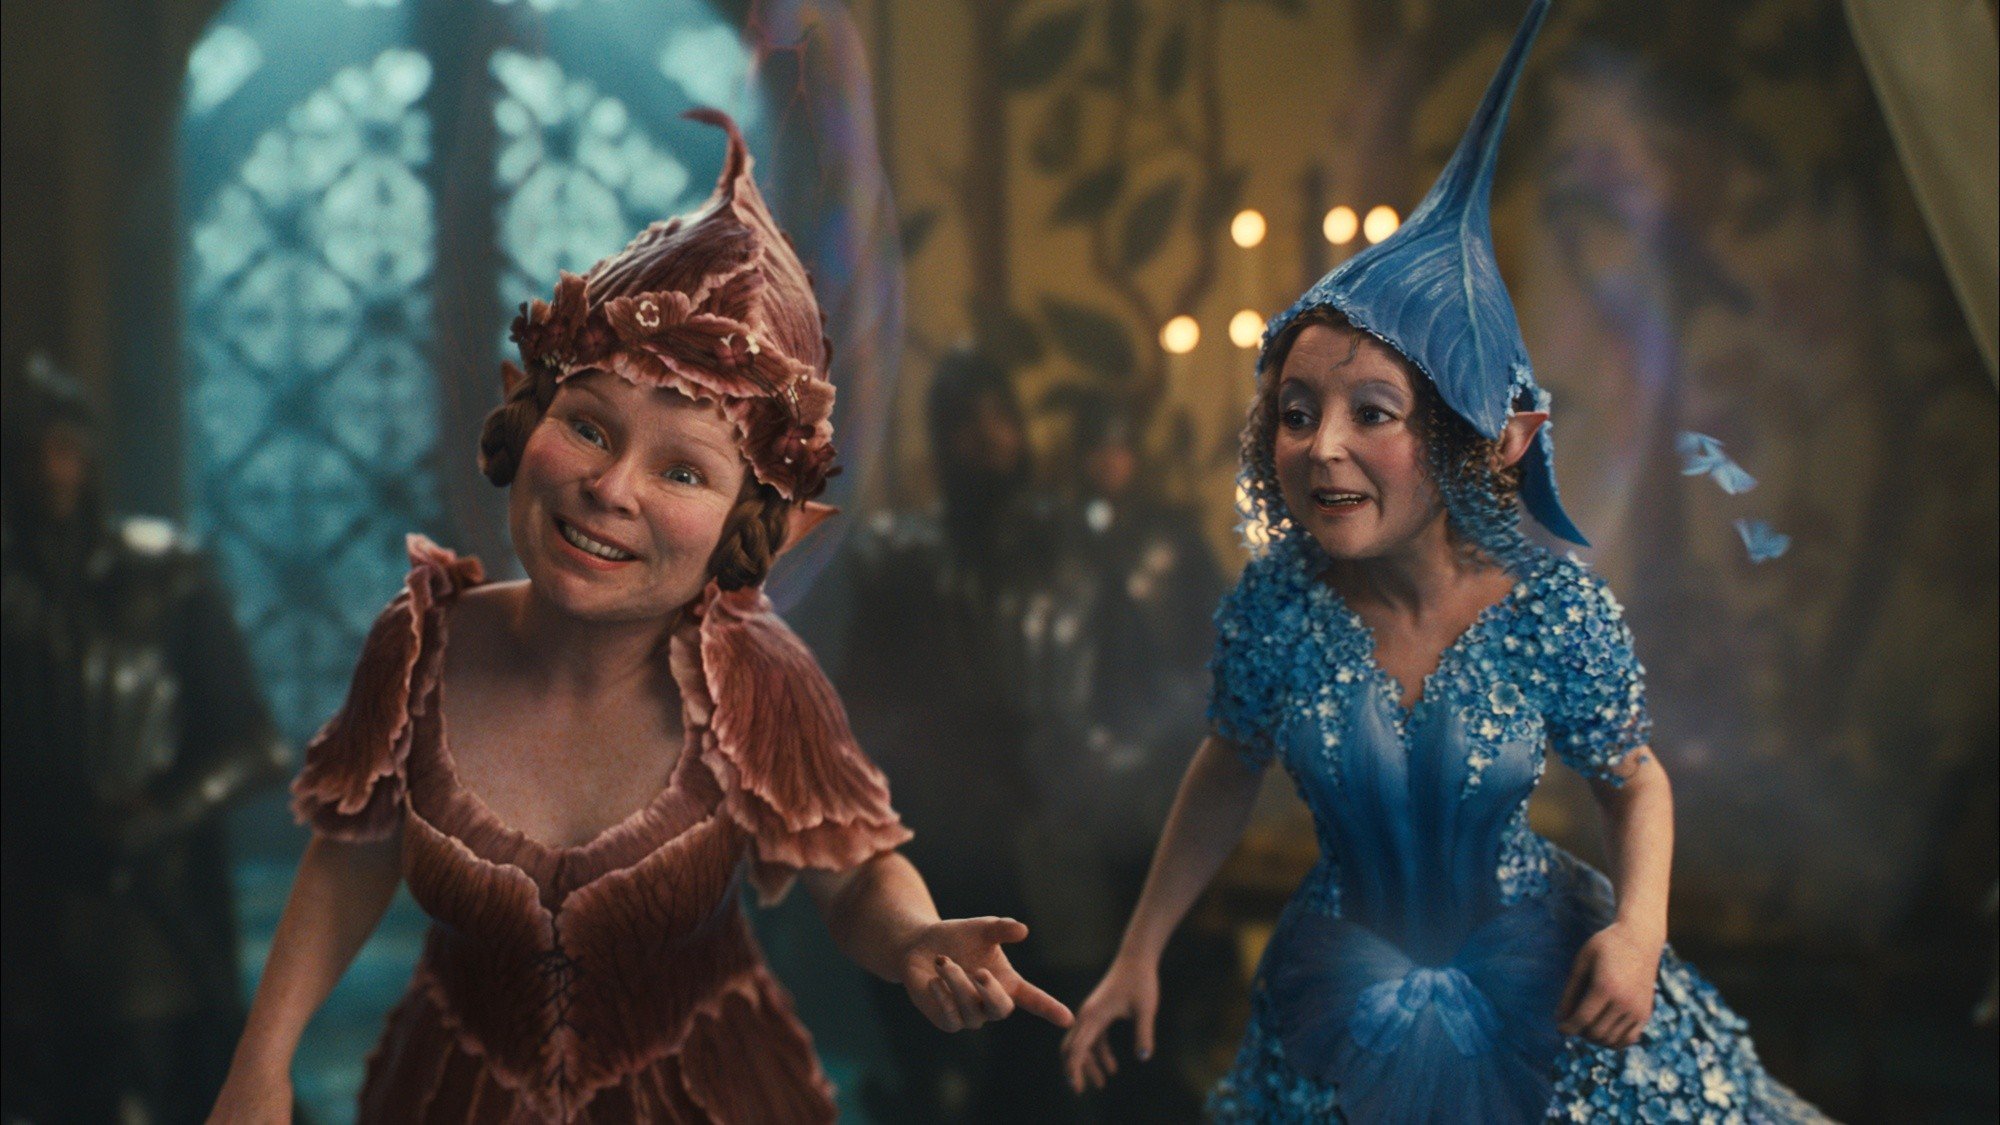 Imelda Staunton stars as Knotgrass and Lesley Manville stars as Flittle in Walt Disney Pictures' Maleficent (2014)